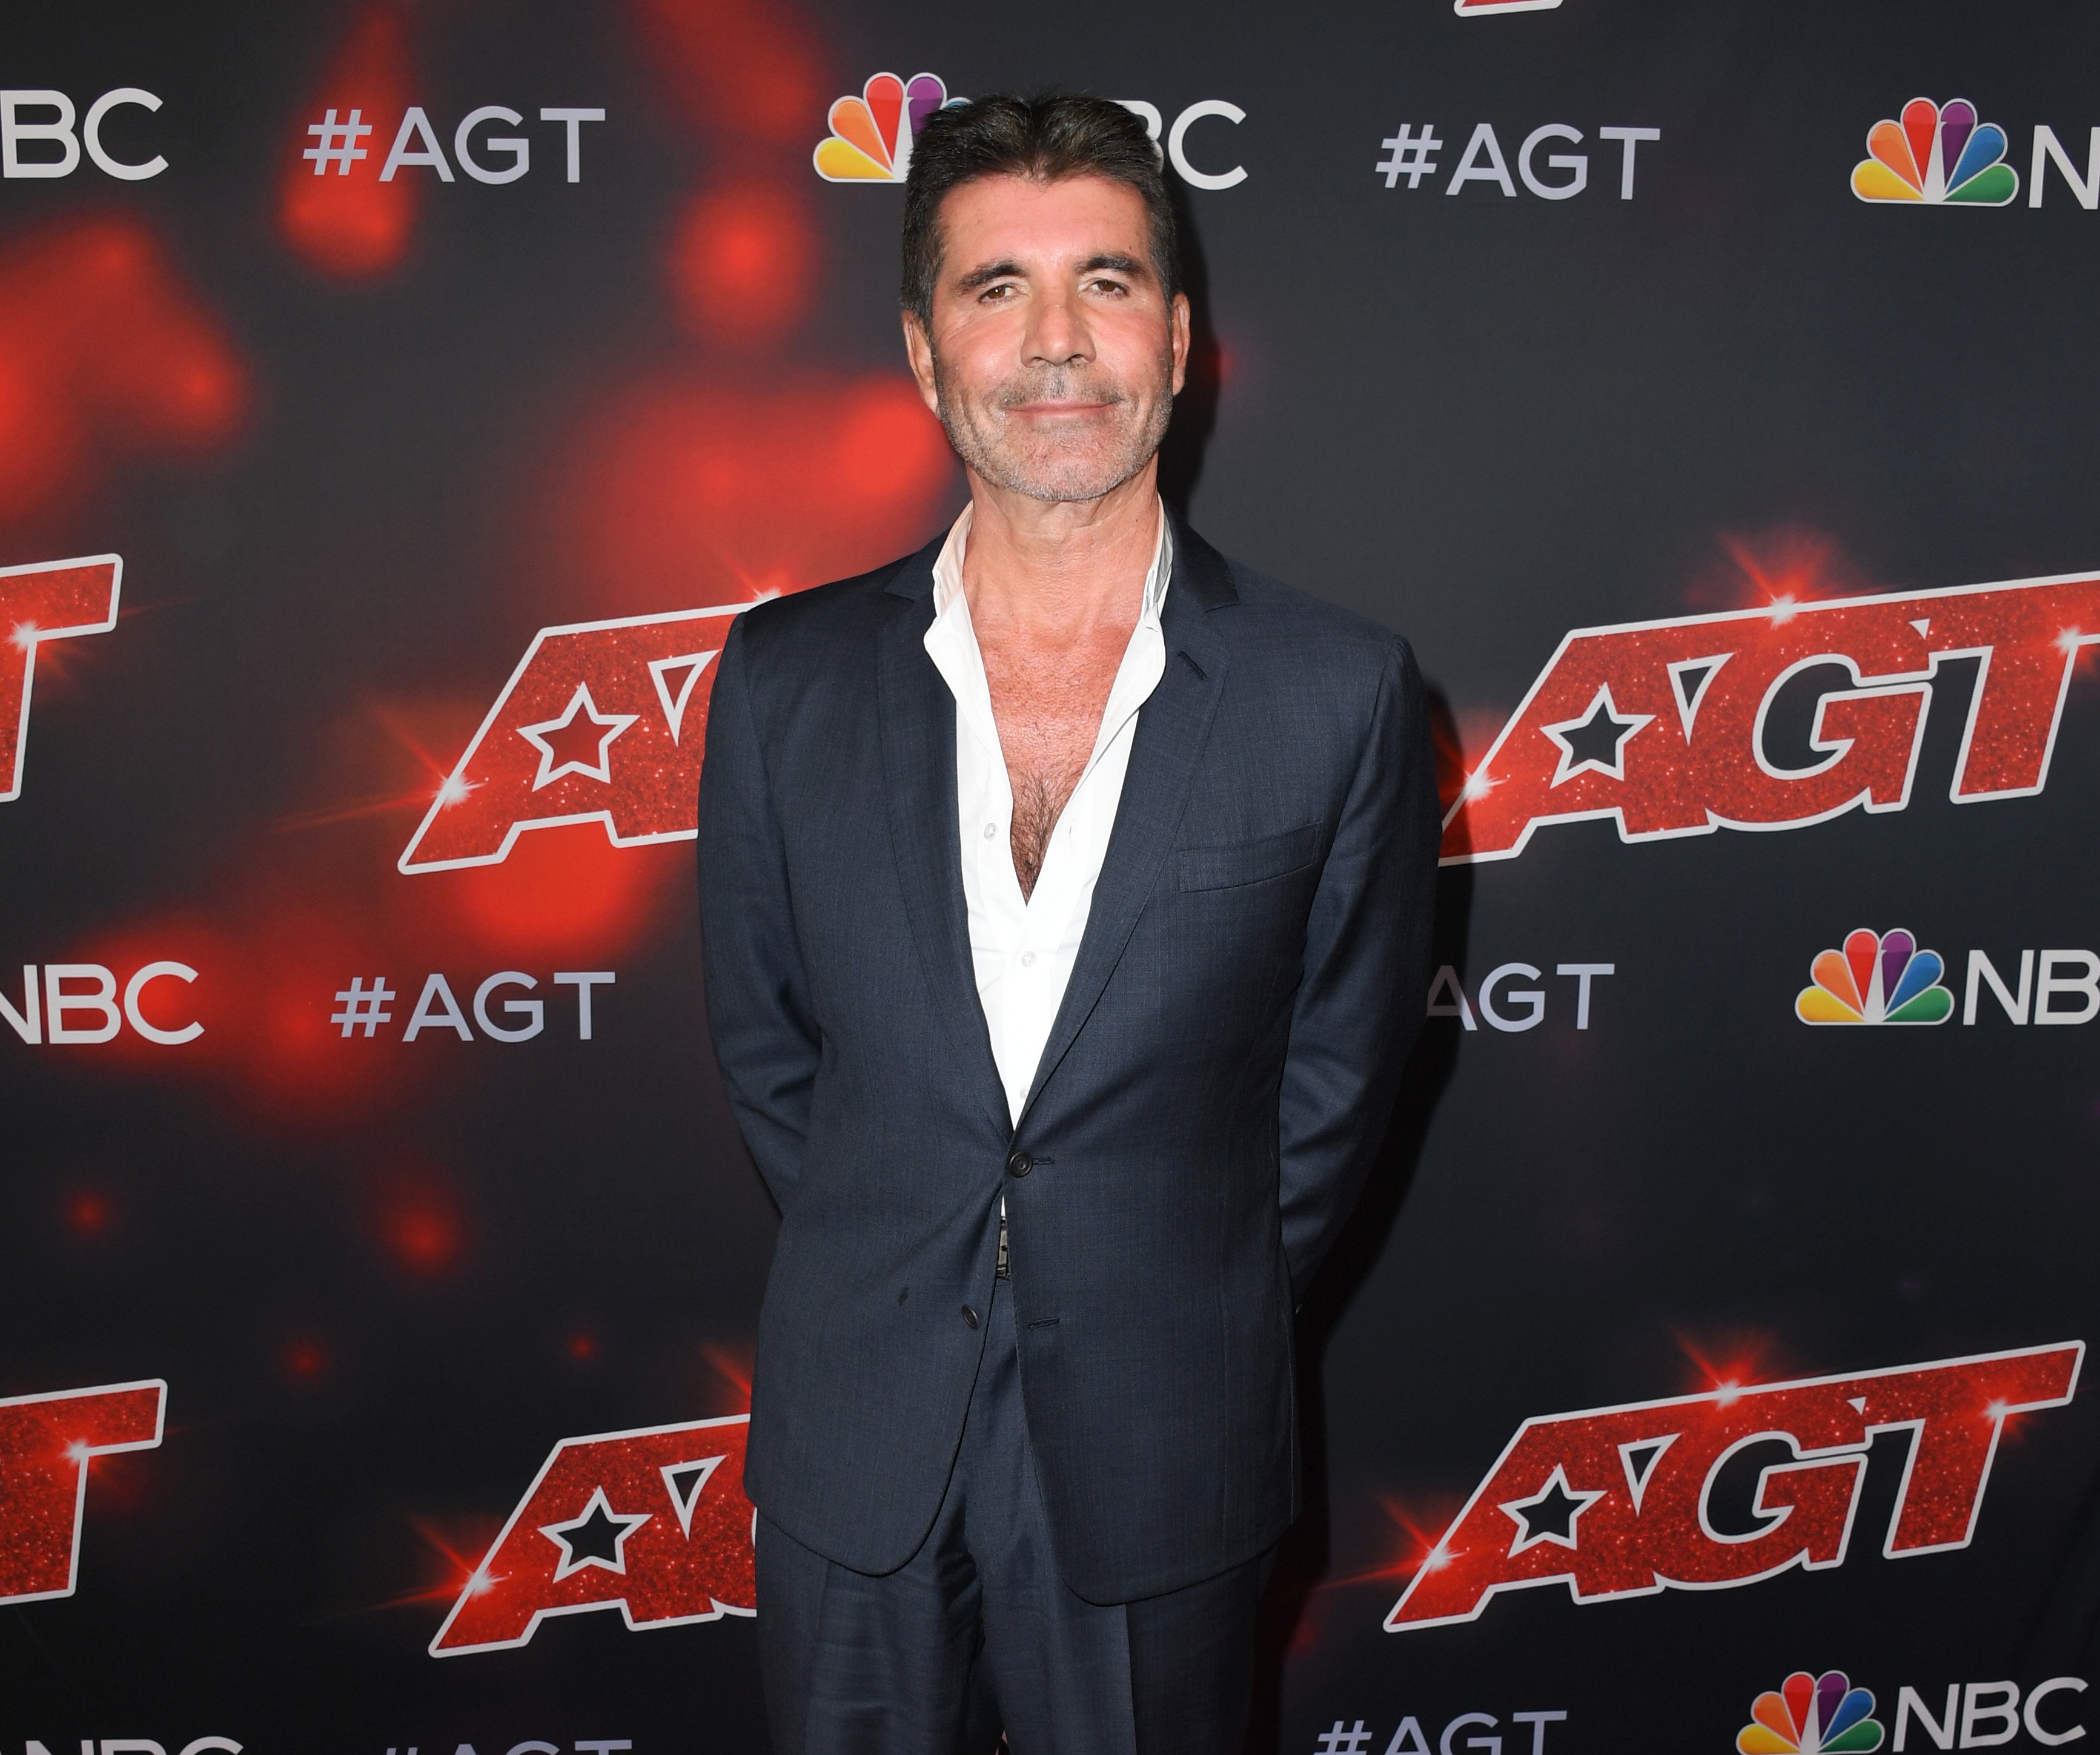 Simon Cowell at "America's Got Talent" Season 16 Live Shows at Dolby Theatre in Hollywood, California | Photo: Jon Kopaloff/Getty Images